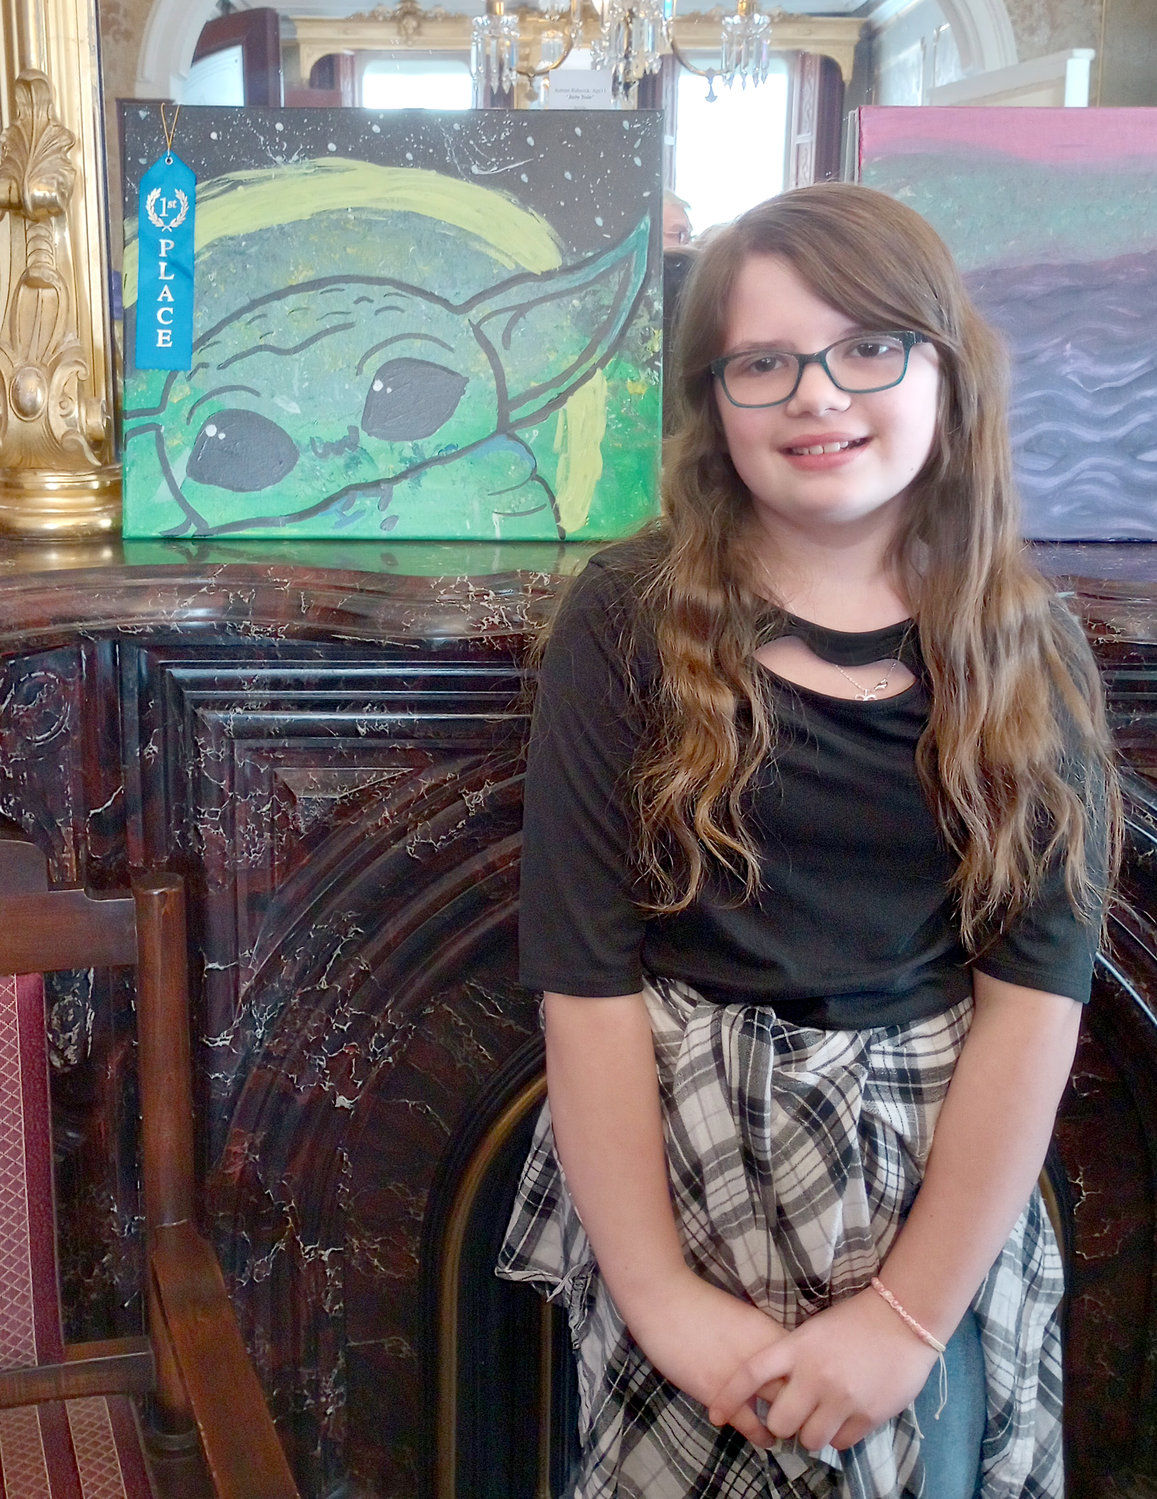 Aubree Babcock won first place with her Baby Yoda painting, in the age 10-12 age group.